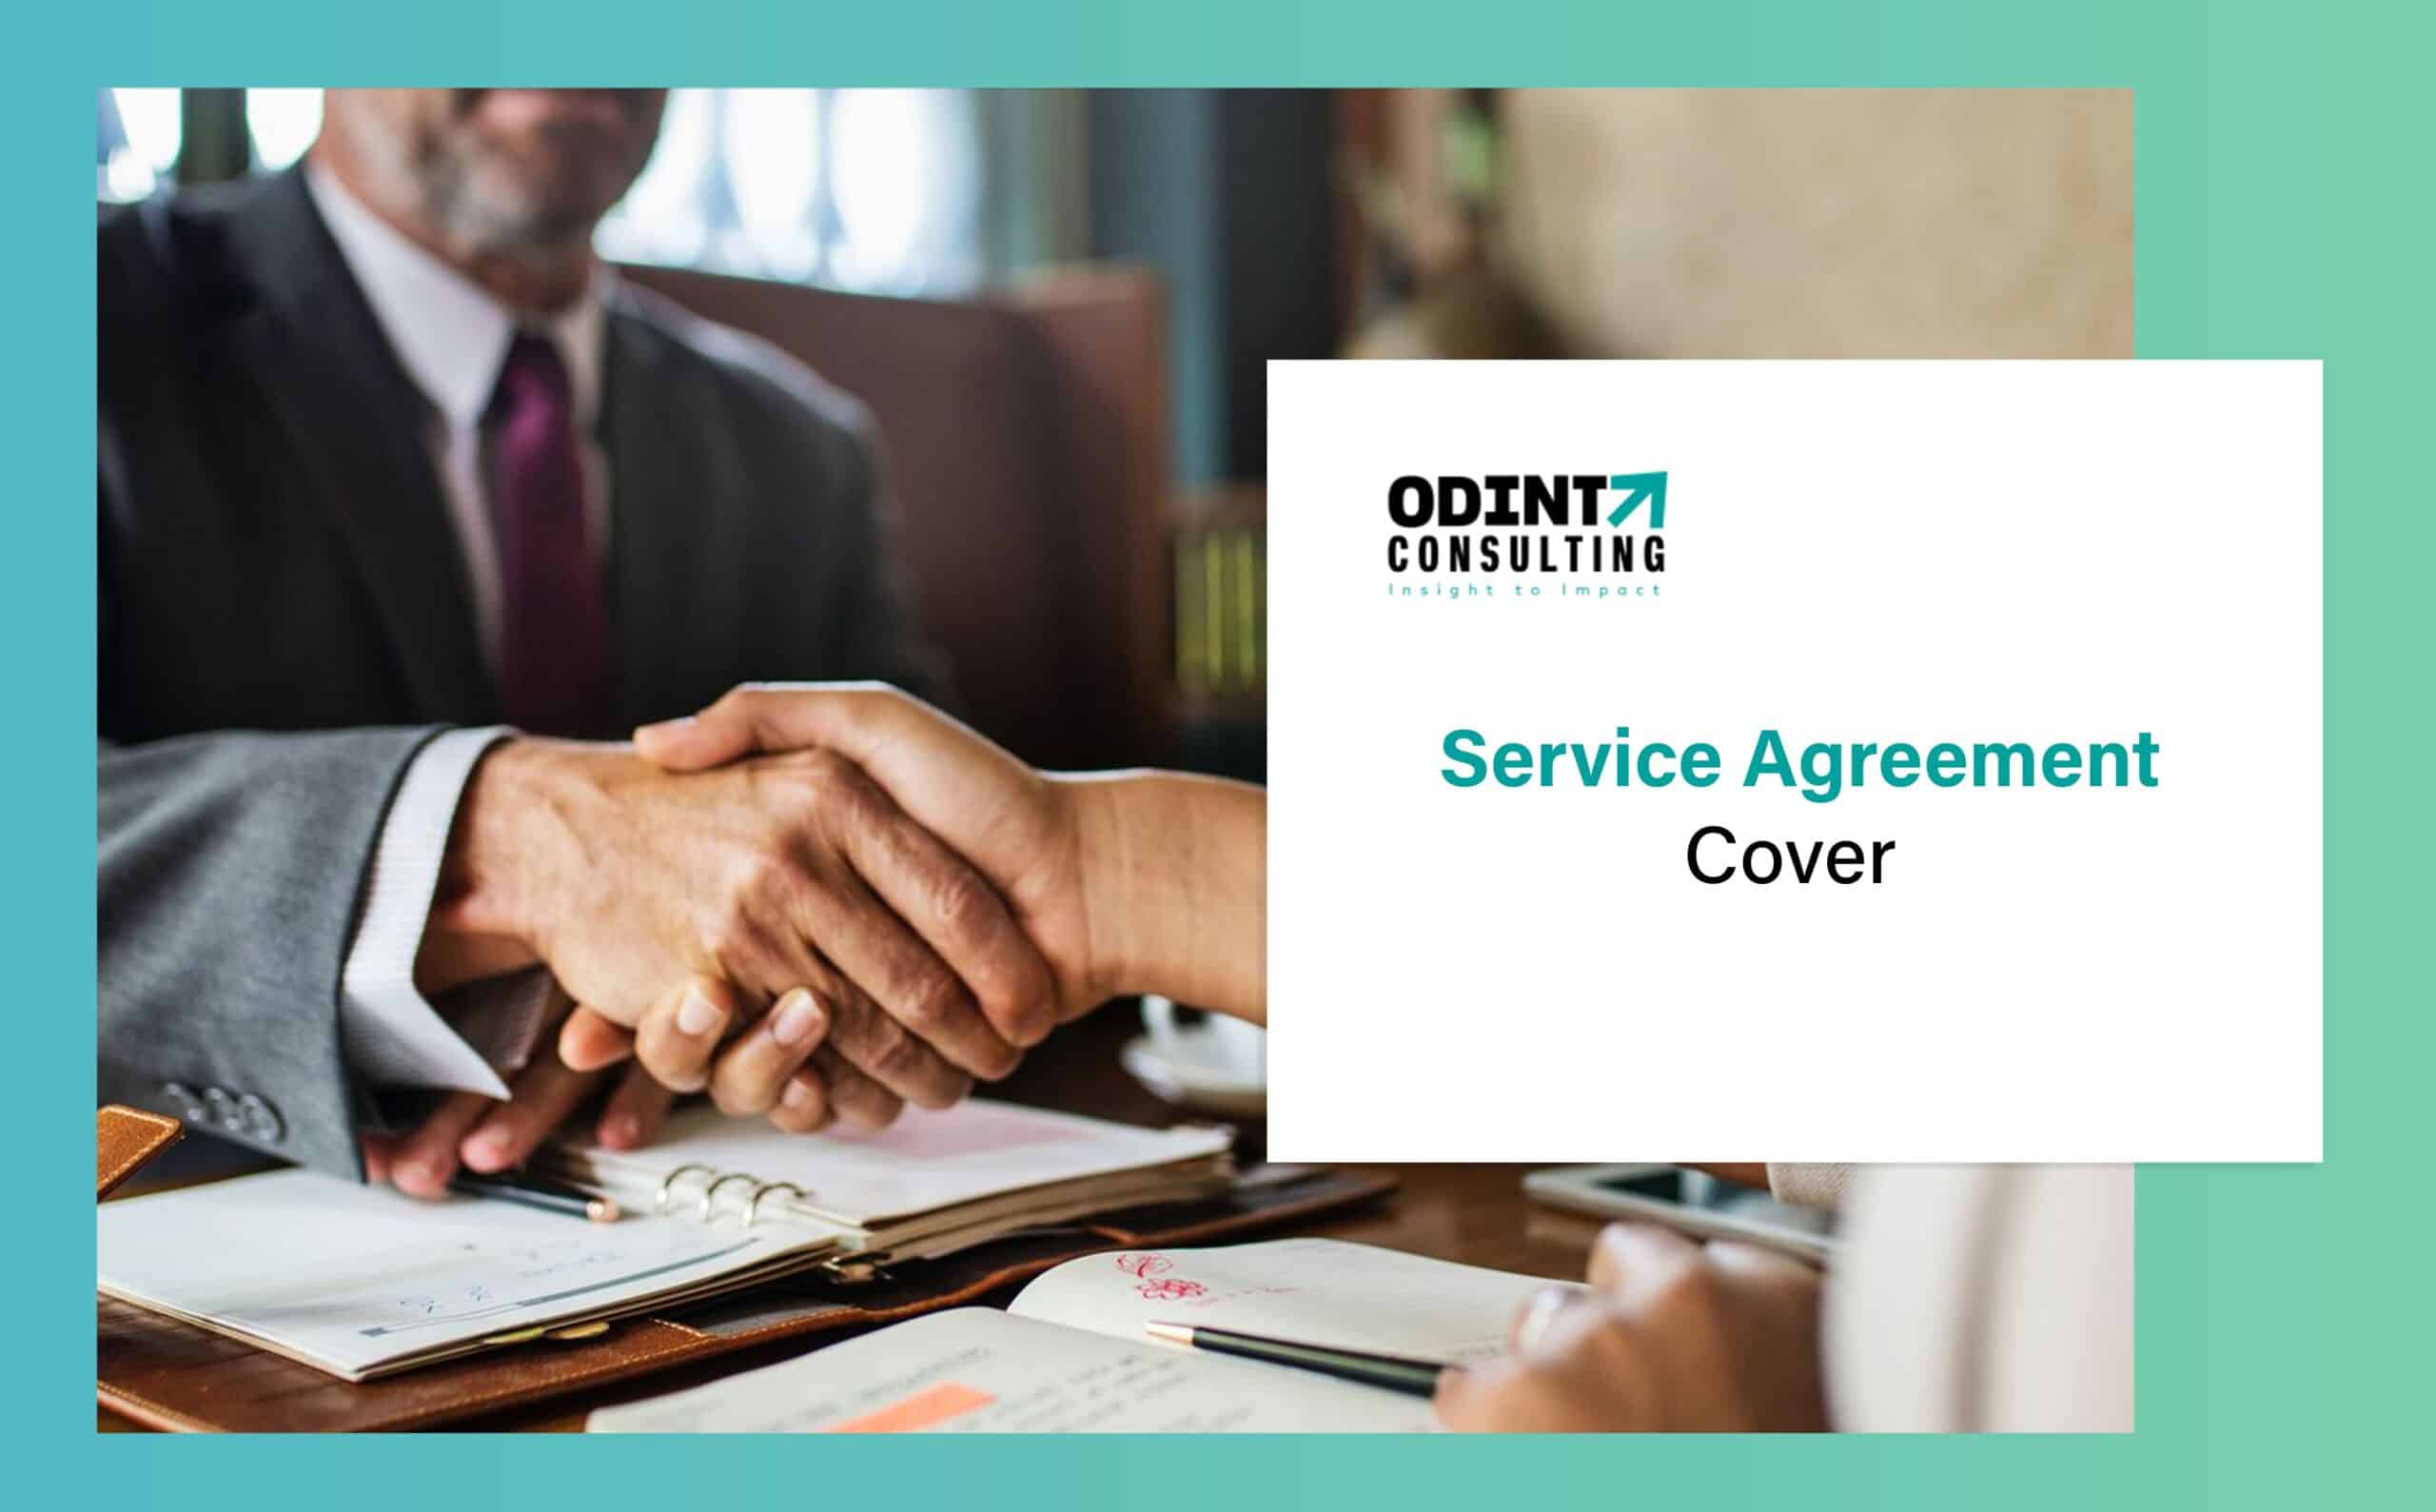 Service Agreement Cover 2022: Importance, Procedure & Components